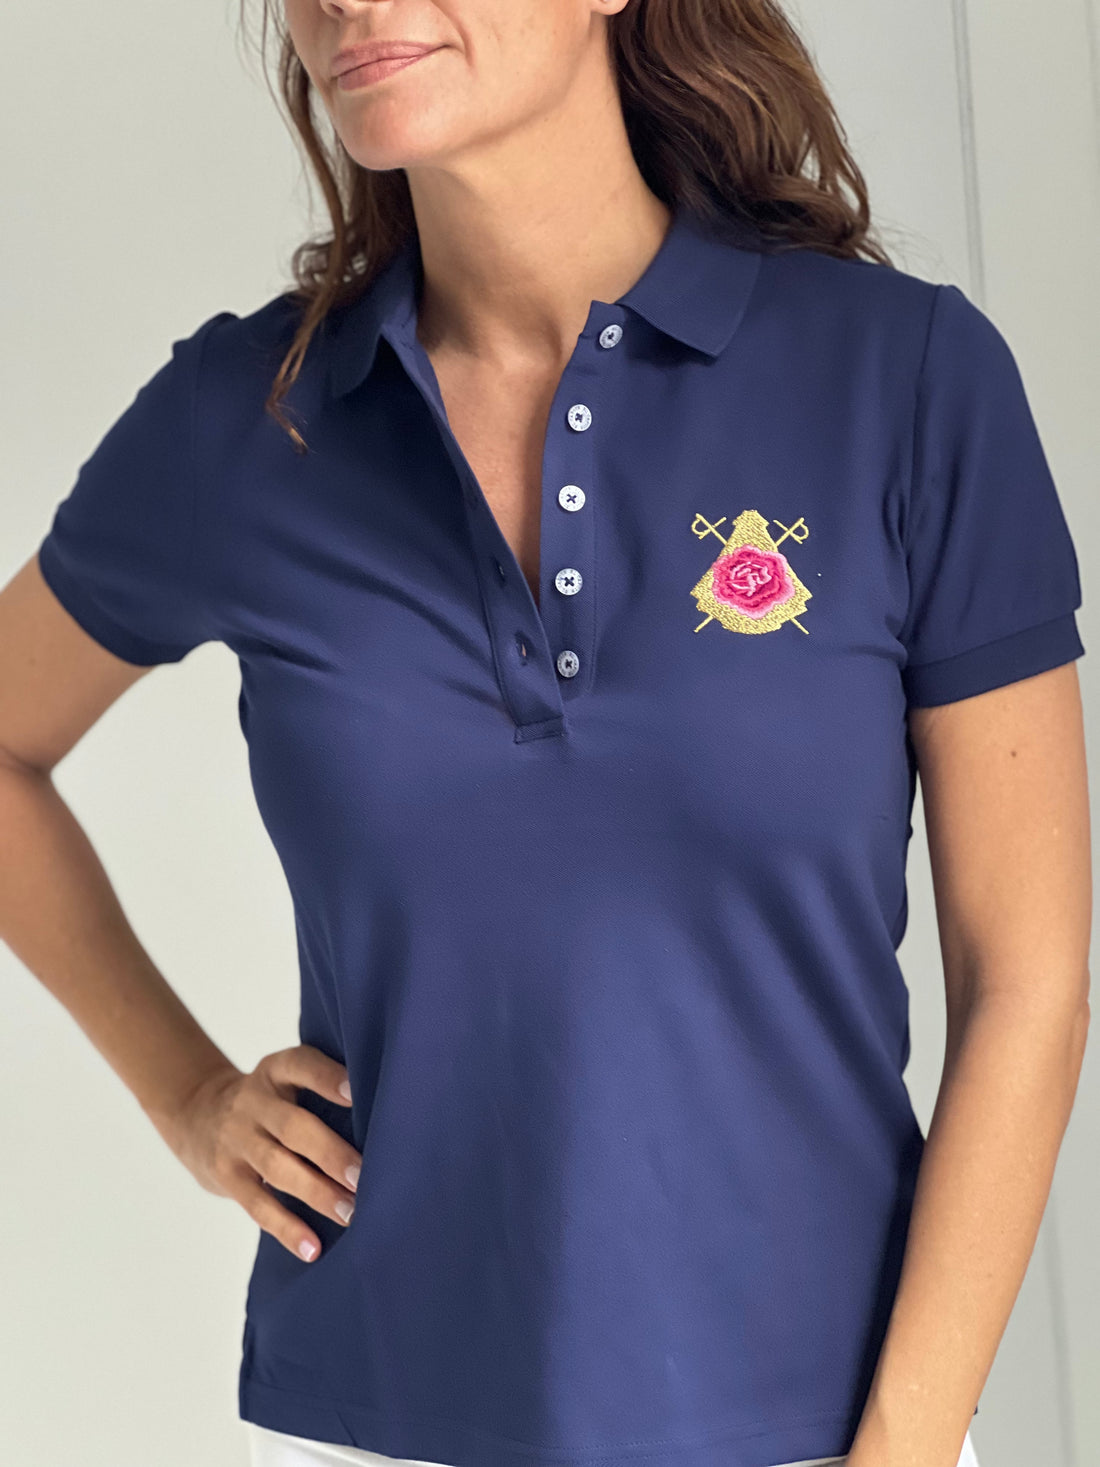 Blue Carnation Capote Women's Polo